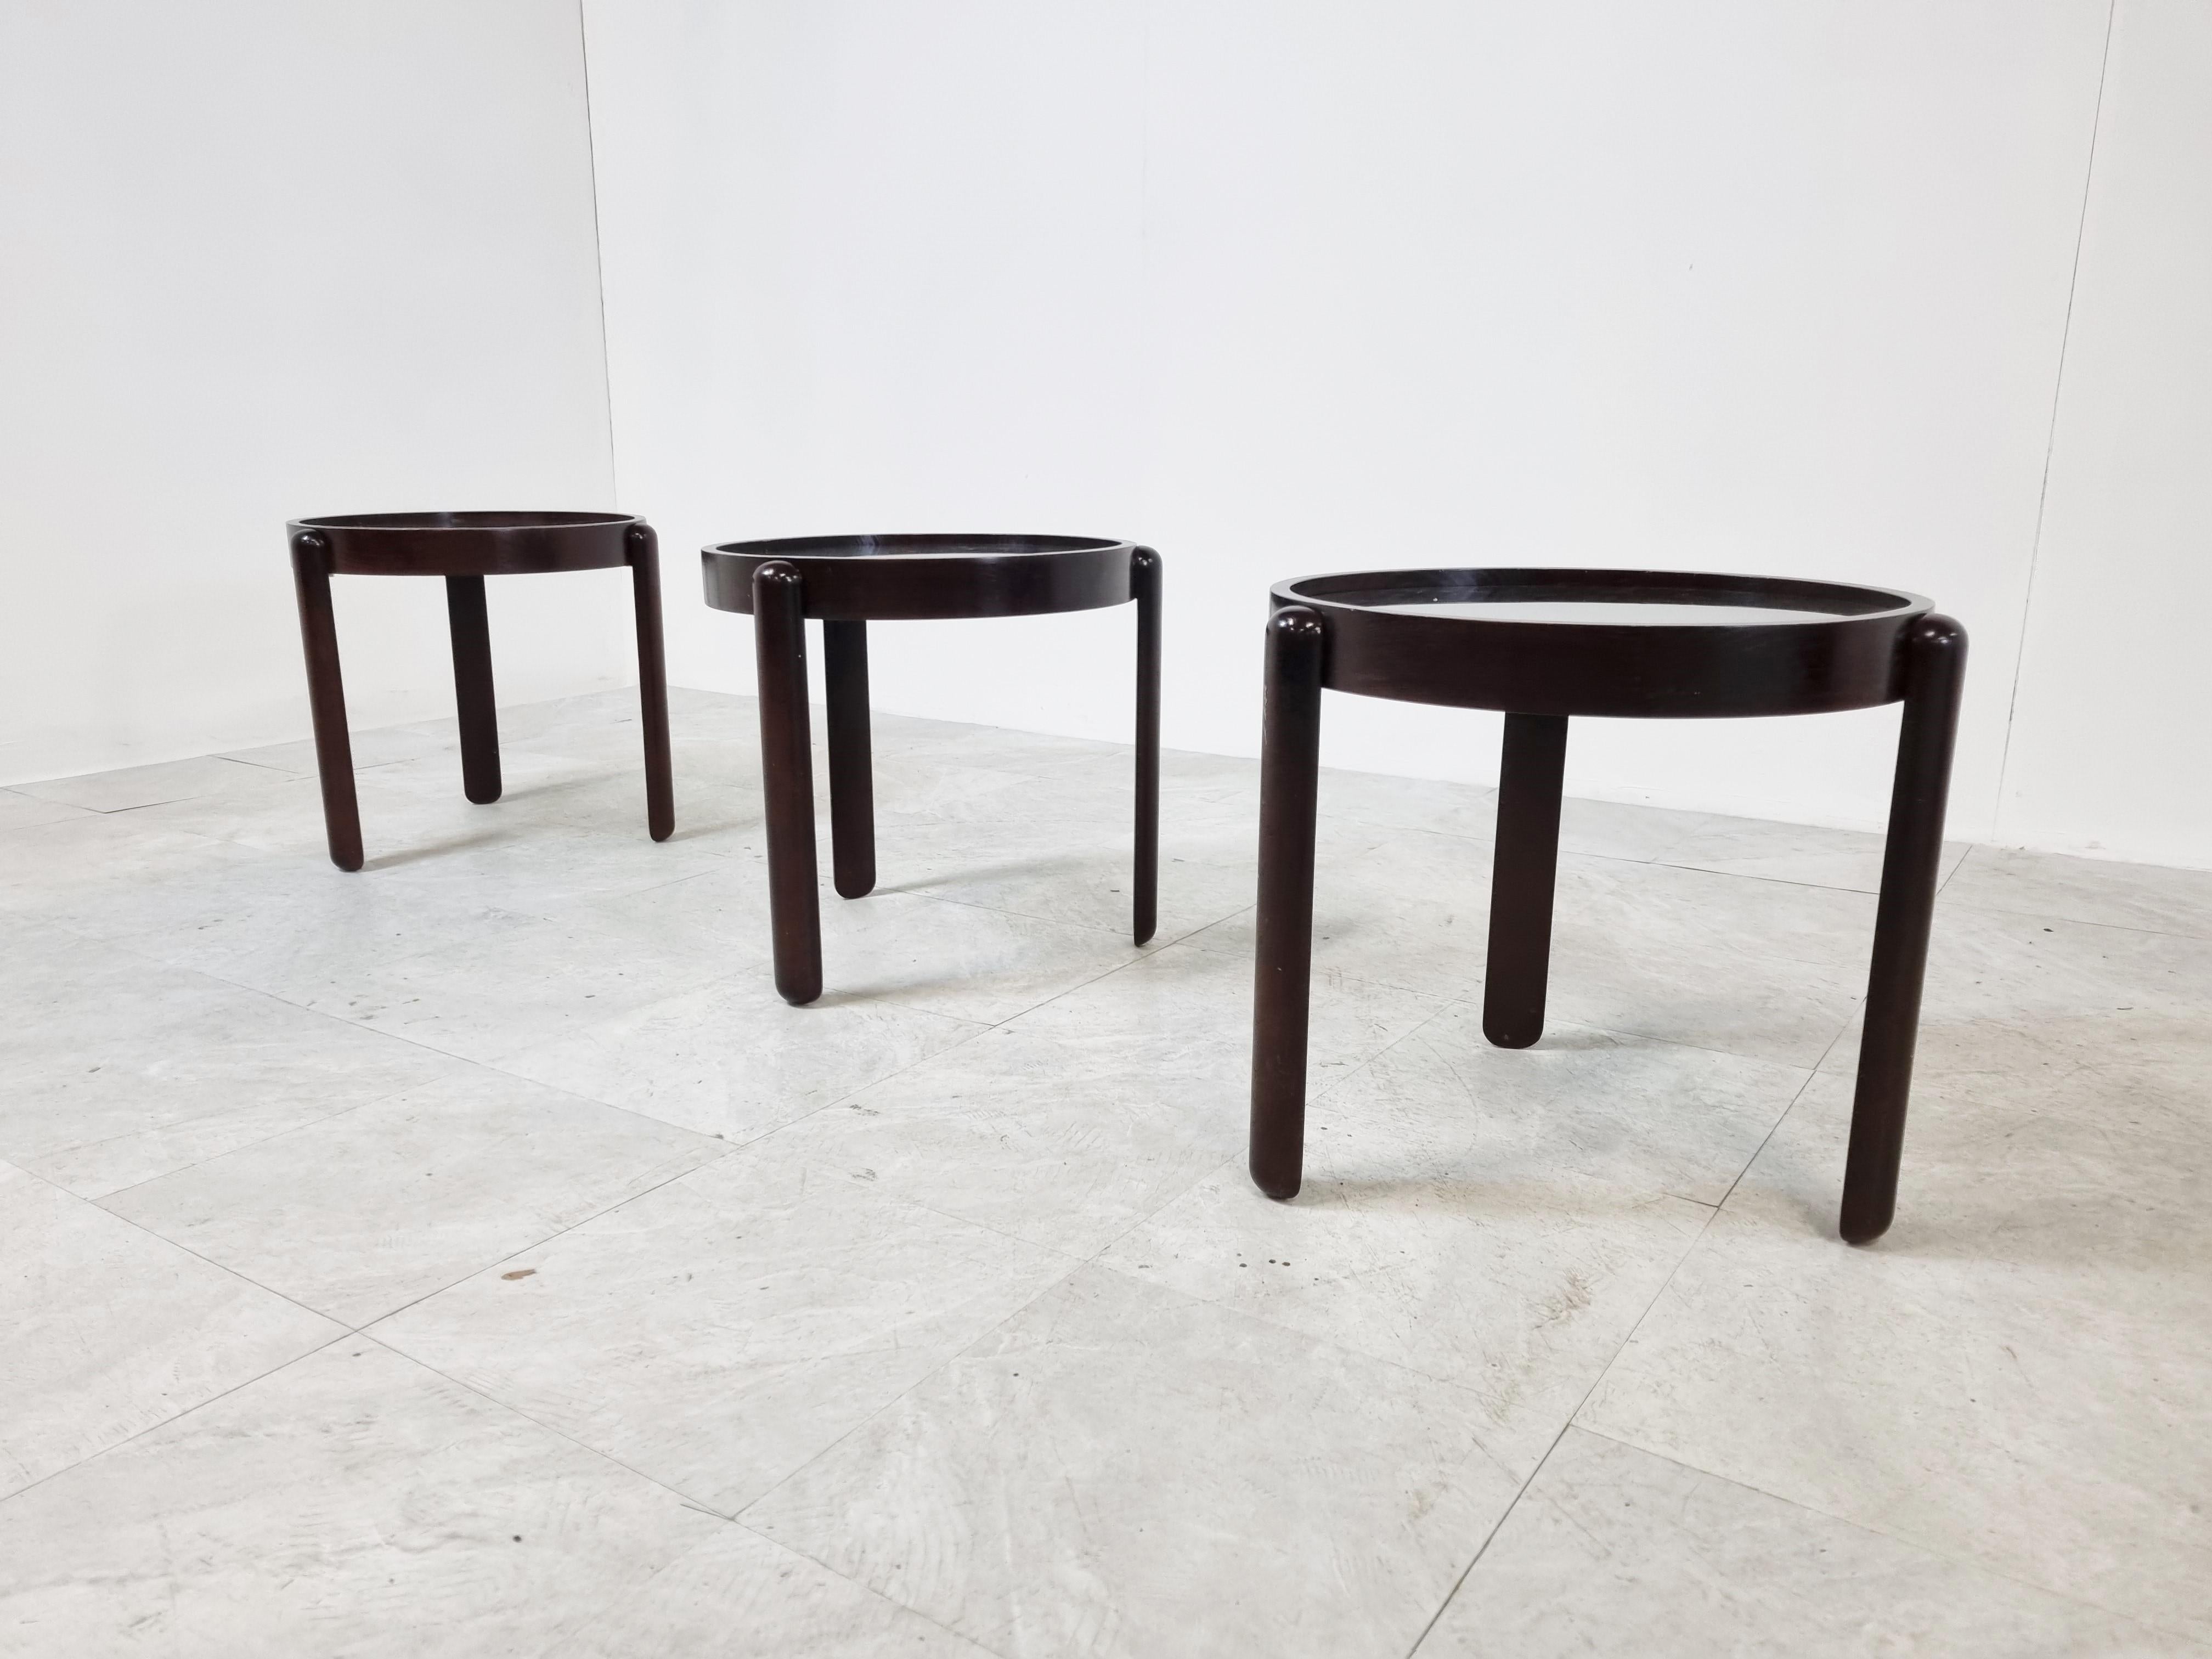 Elegant Trittico side tables by Porrada.

it can be grouped together to create an arrangement, it can also be stacked on top of each other.

1970s - Italy

Good condition

Measures: Height: 41cm/16.14